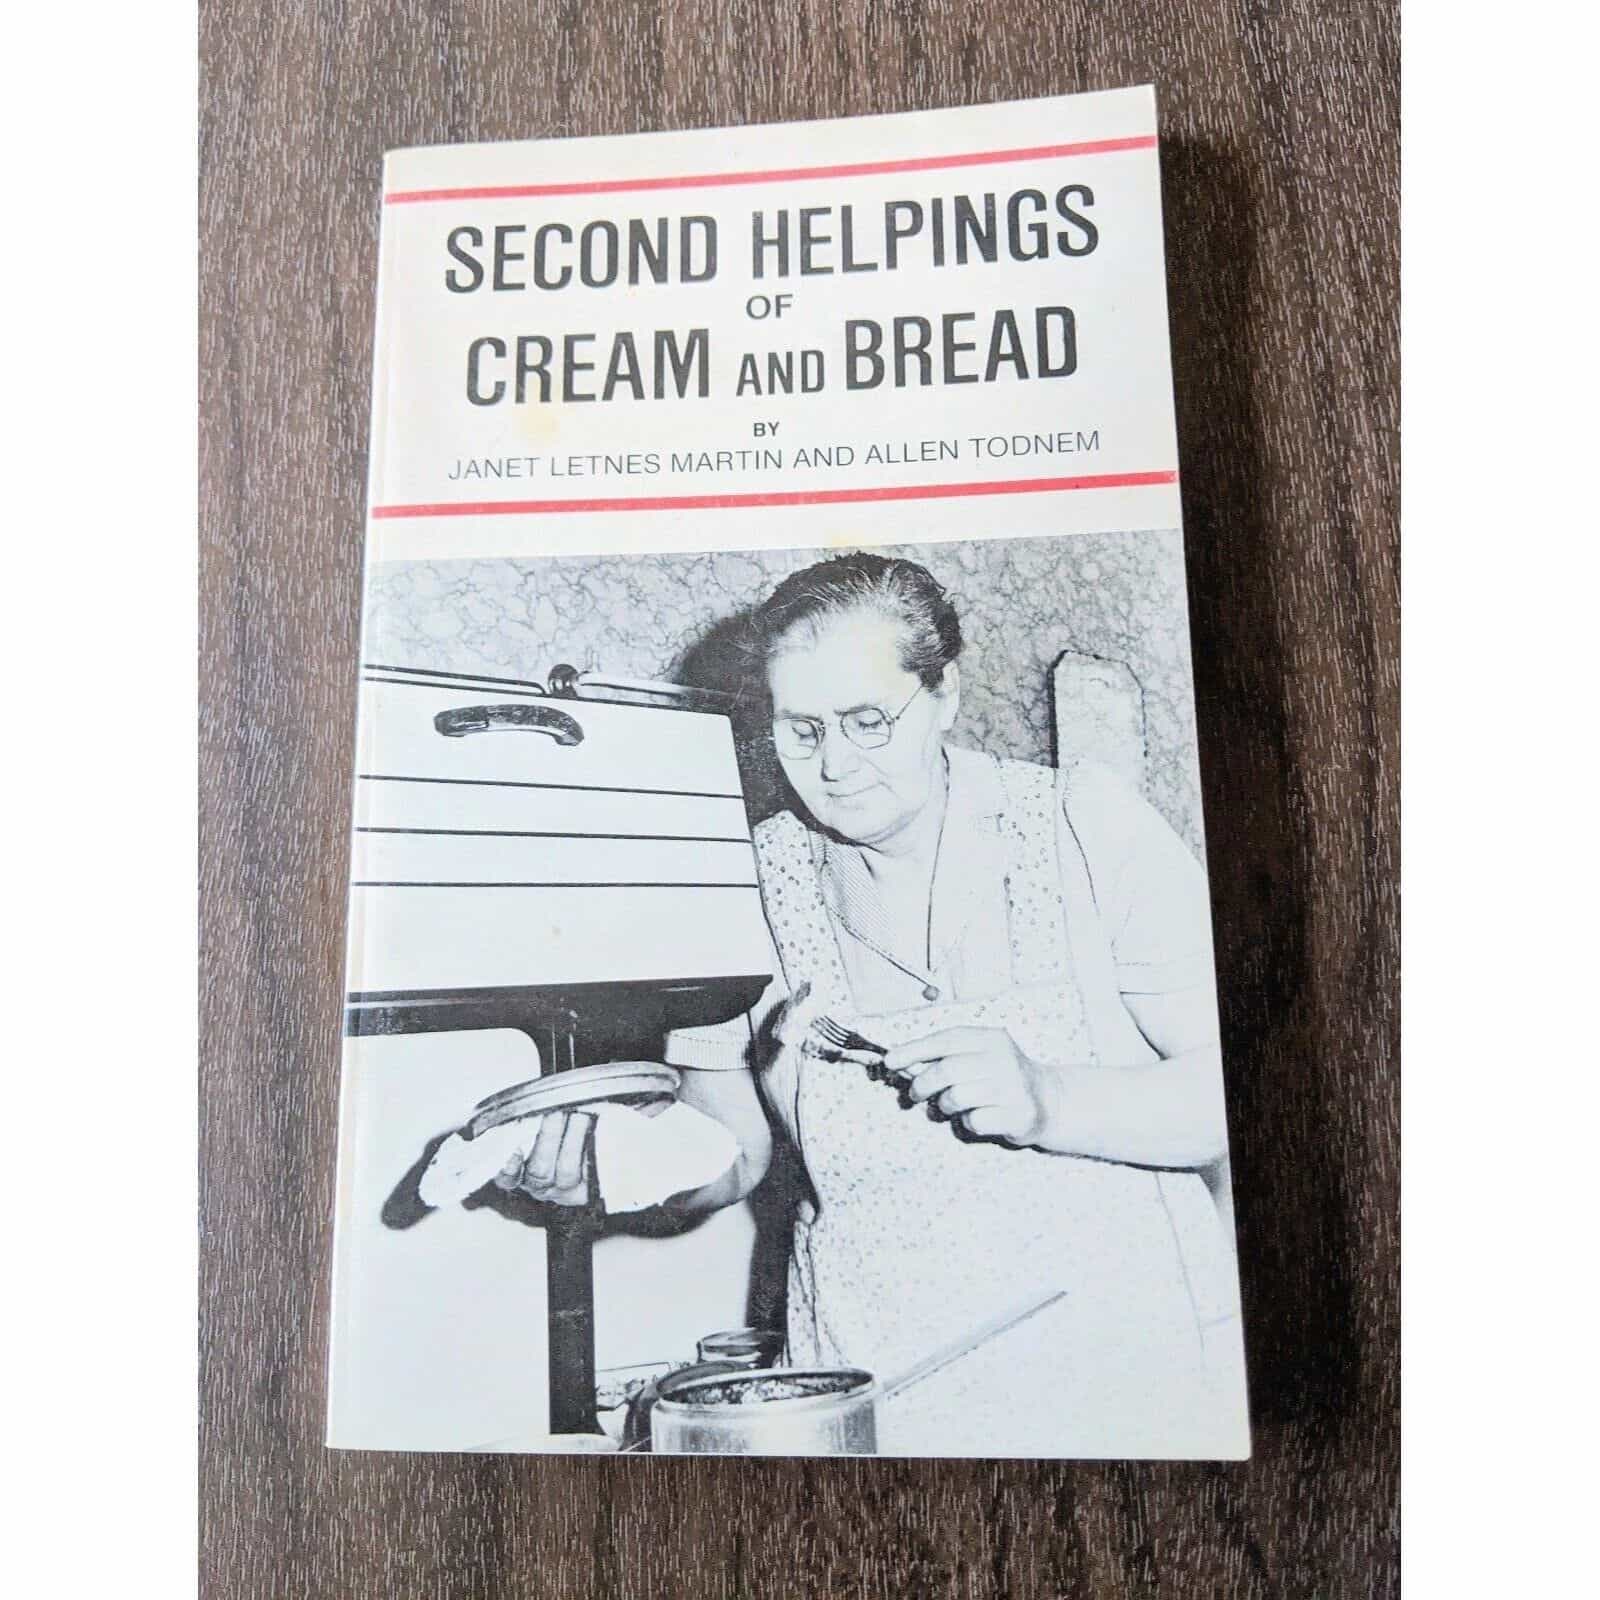 Second Helpings of Cream And Bread by Janet Letnes Martin and Allen Todnem Book